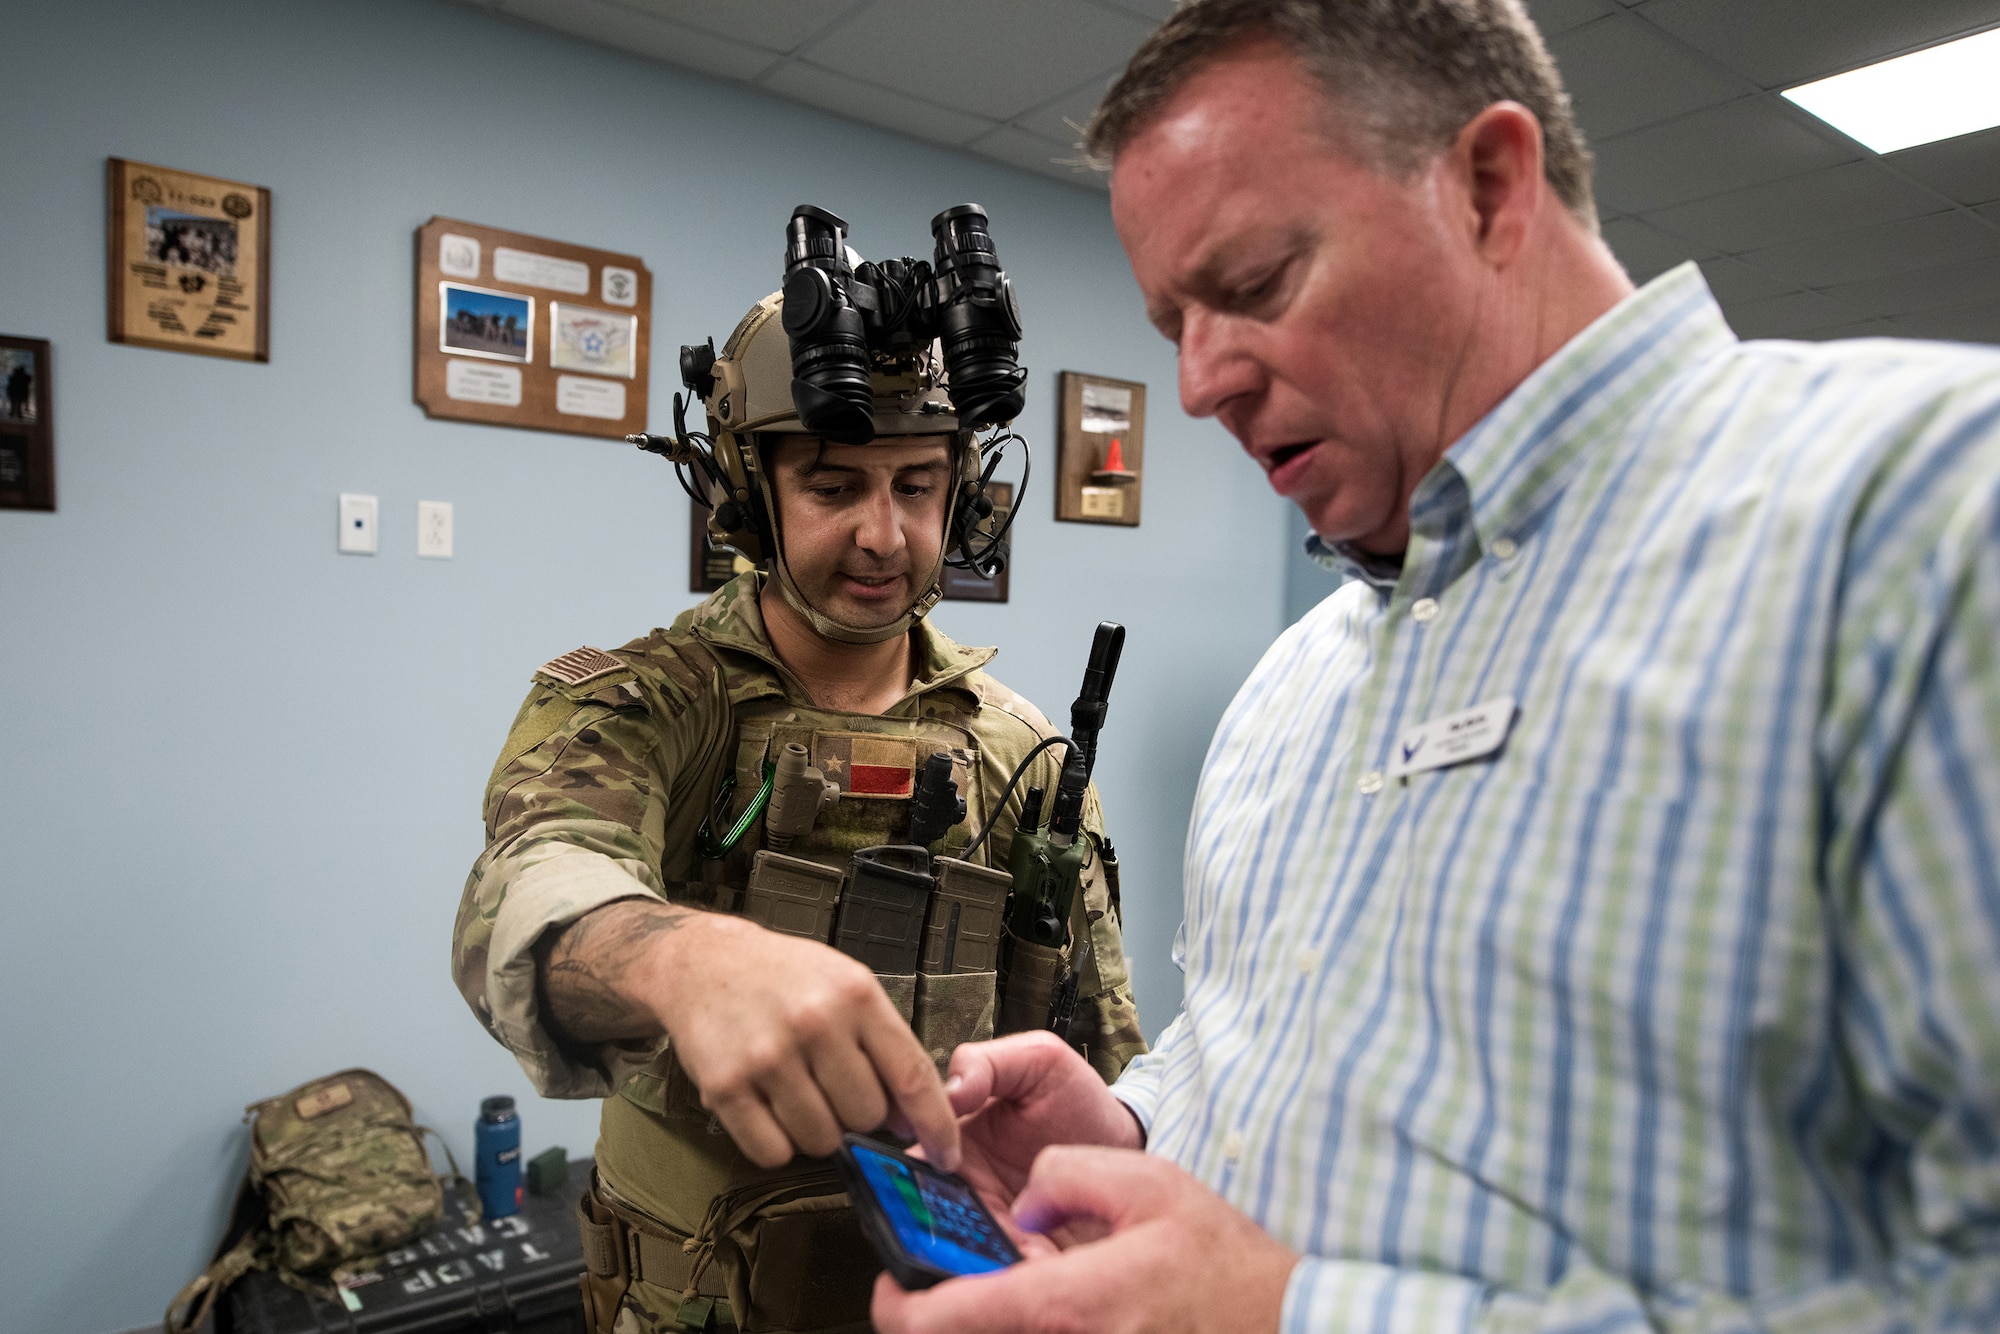 U.S. Air Force Staff Sgt. Nicholas Vead, 353rd Special Warfare Training Wing, Tactical Air Control Party instructor, demonstrates his equipment for Tim Burke, Air National Guard Bureau civic leader from Bellevue, Nebraska, Nov. 7, 2019, at Joint Base San Antonio-Medina Annex, Texas. During the visit, civic leaders toured missions of 37th Training Wing, 12th Flying Training Wing, 502nd Air Base Wing and Air Force Recruiting Service, all at JBSA locations. The Air Force Civic Leader Program is an Air Staff-level program comprising major command-selected community leaders from a wide variety of industries and sectors, including banking and economic development, construction, manufacturing, education, healthcare, science and technology. The program helps community leaders understand and advocate for the Air Force's diverse missions.